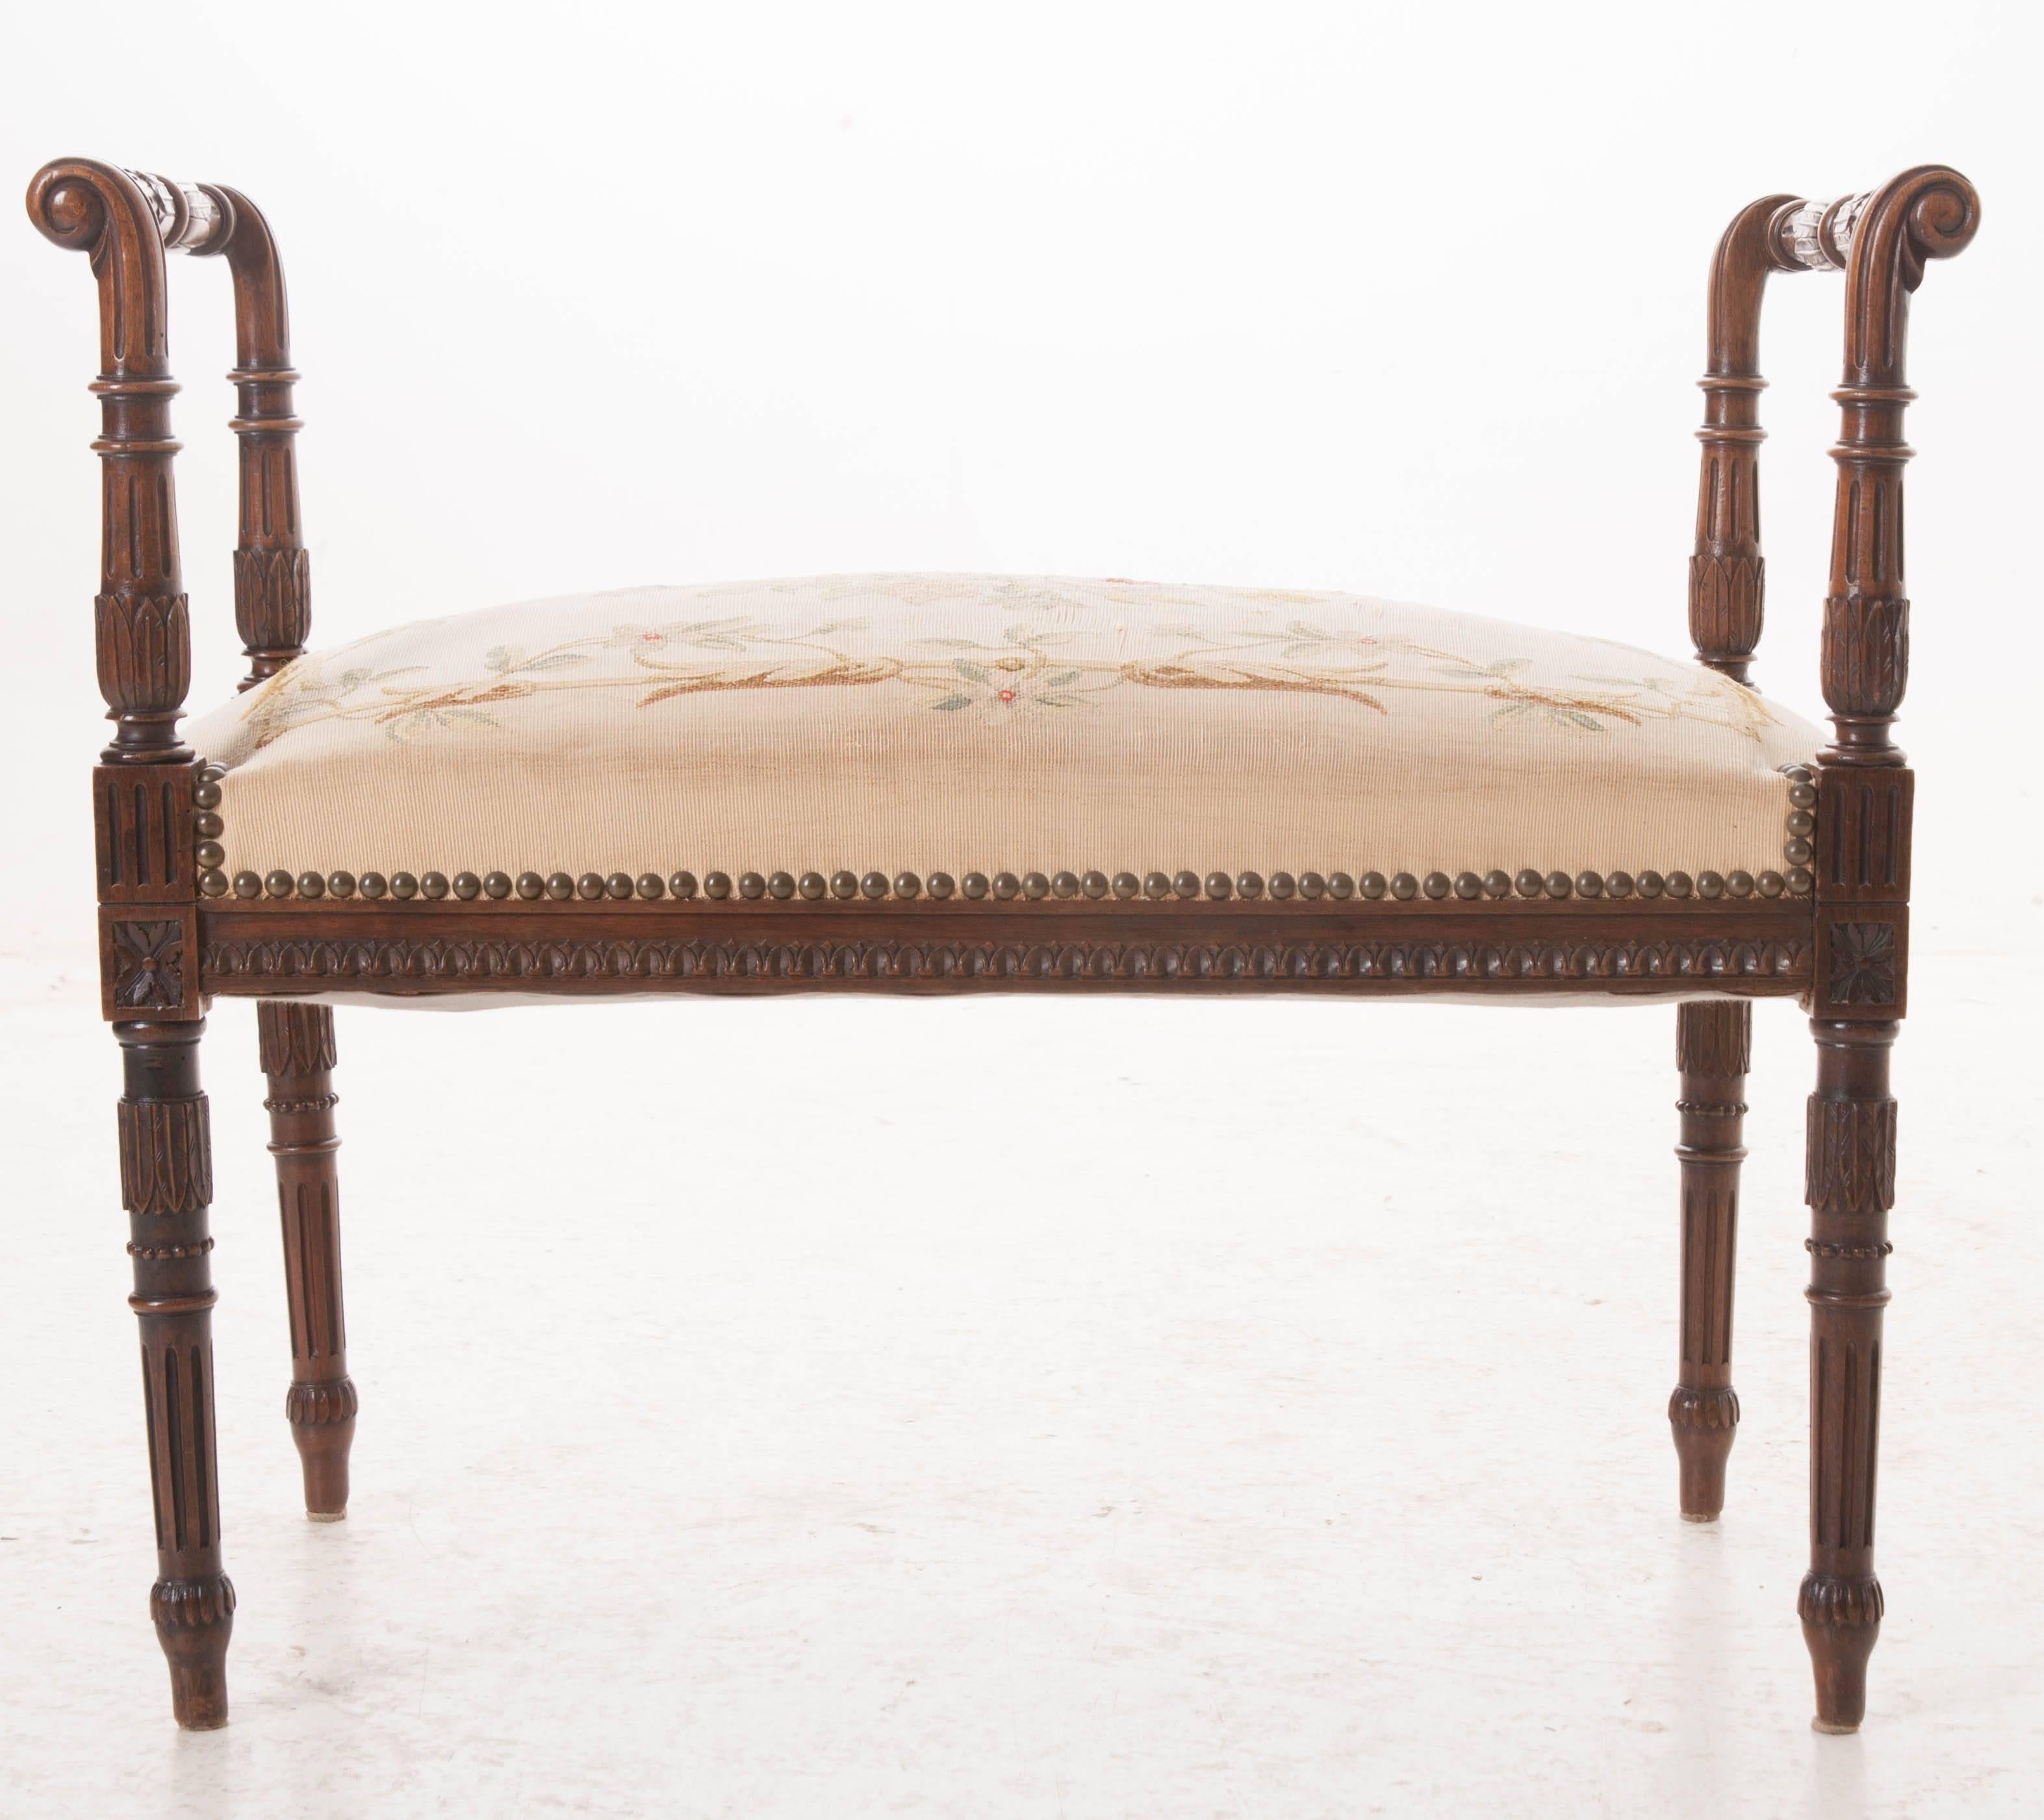 An outstanding Louis XVI period mahogany window seat with tapestry upholstery from early 19th century, France. The refined frame boasts exceptionally well carved details with foliate, fluted, and lamb's tongue motifs just to name a few. The tapestry